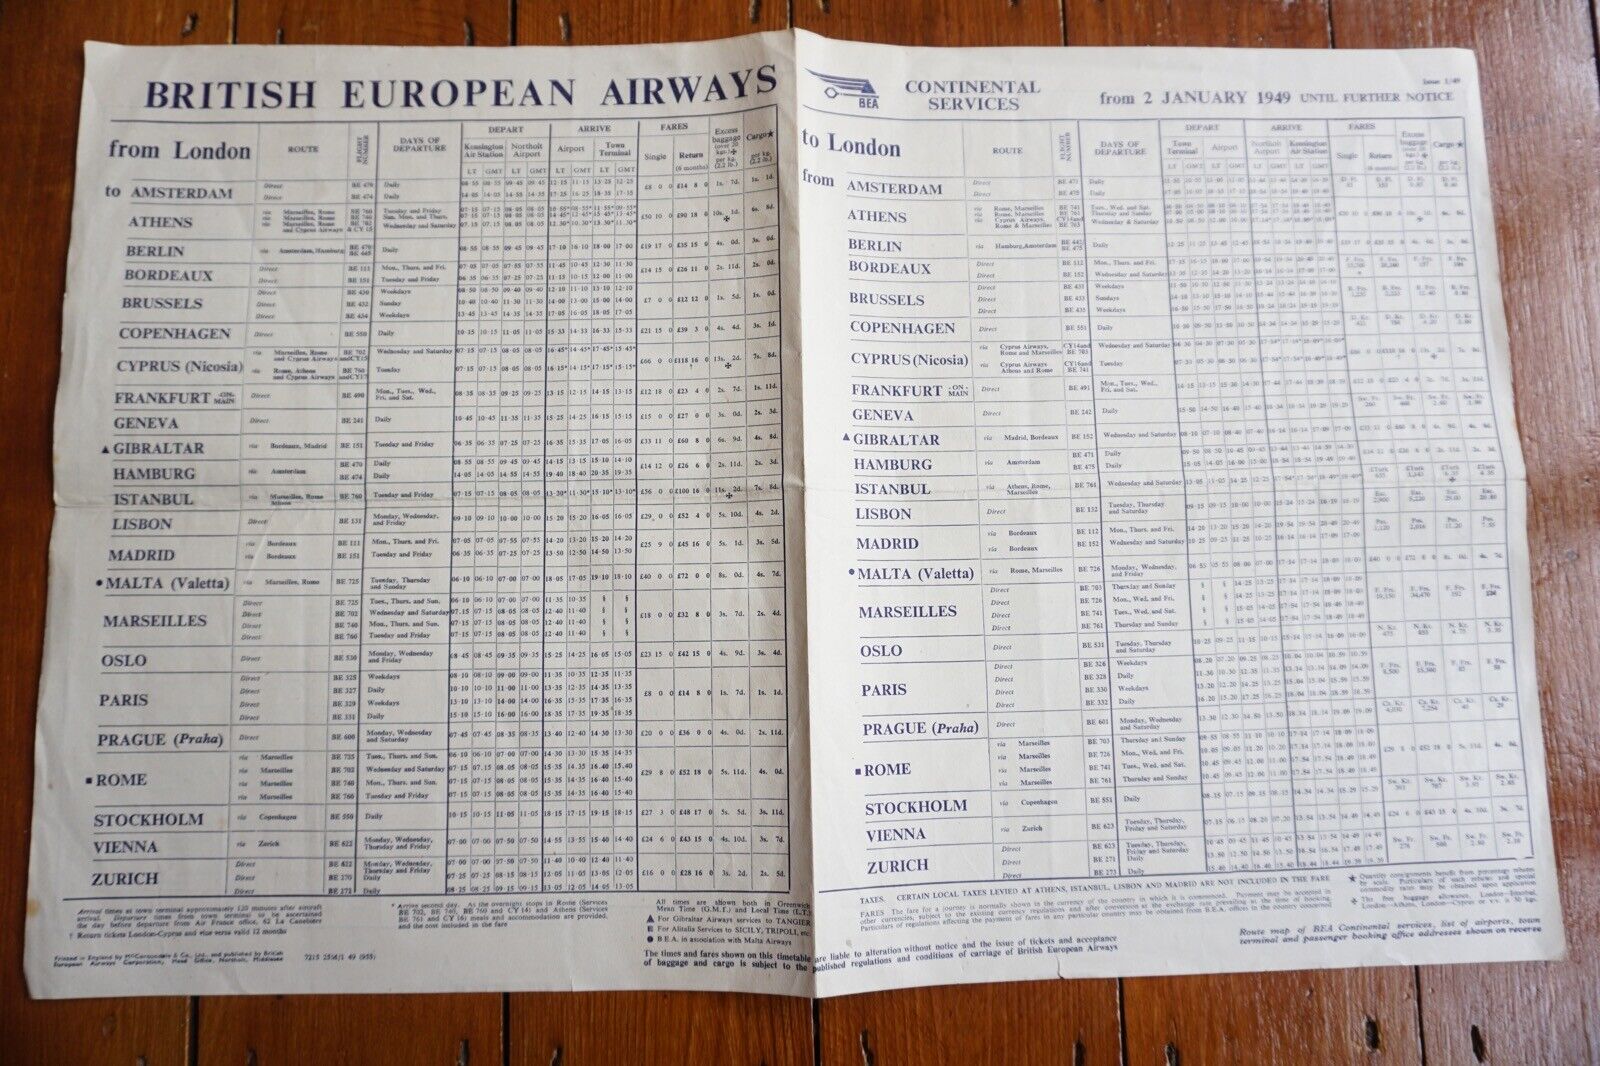 1949 BEA Continental Services Airline Timetable Schedule  